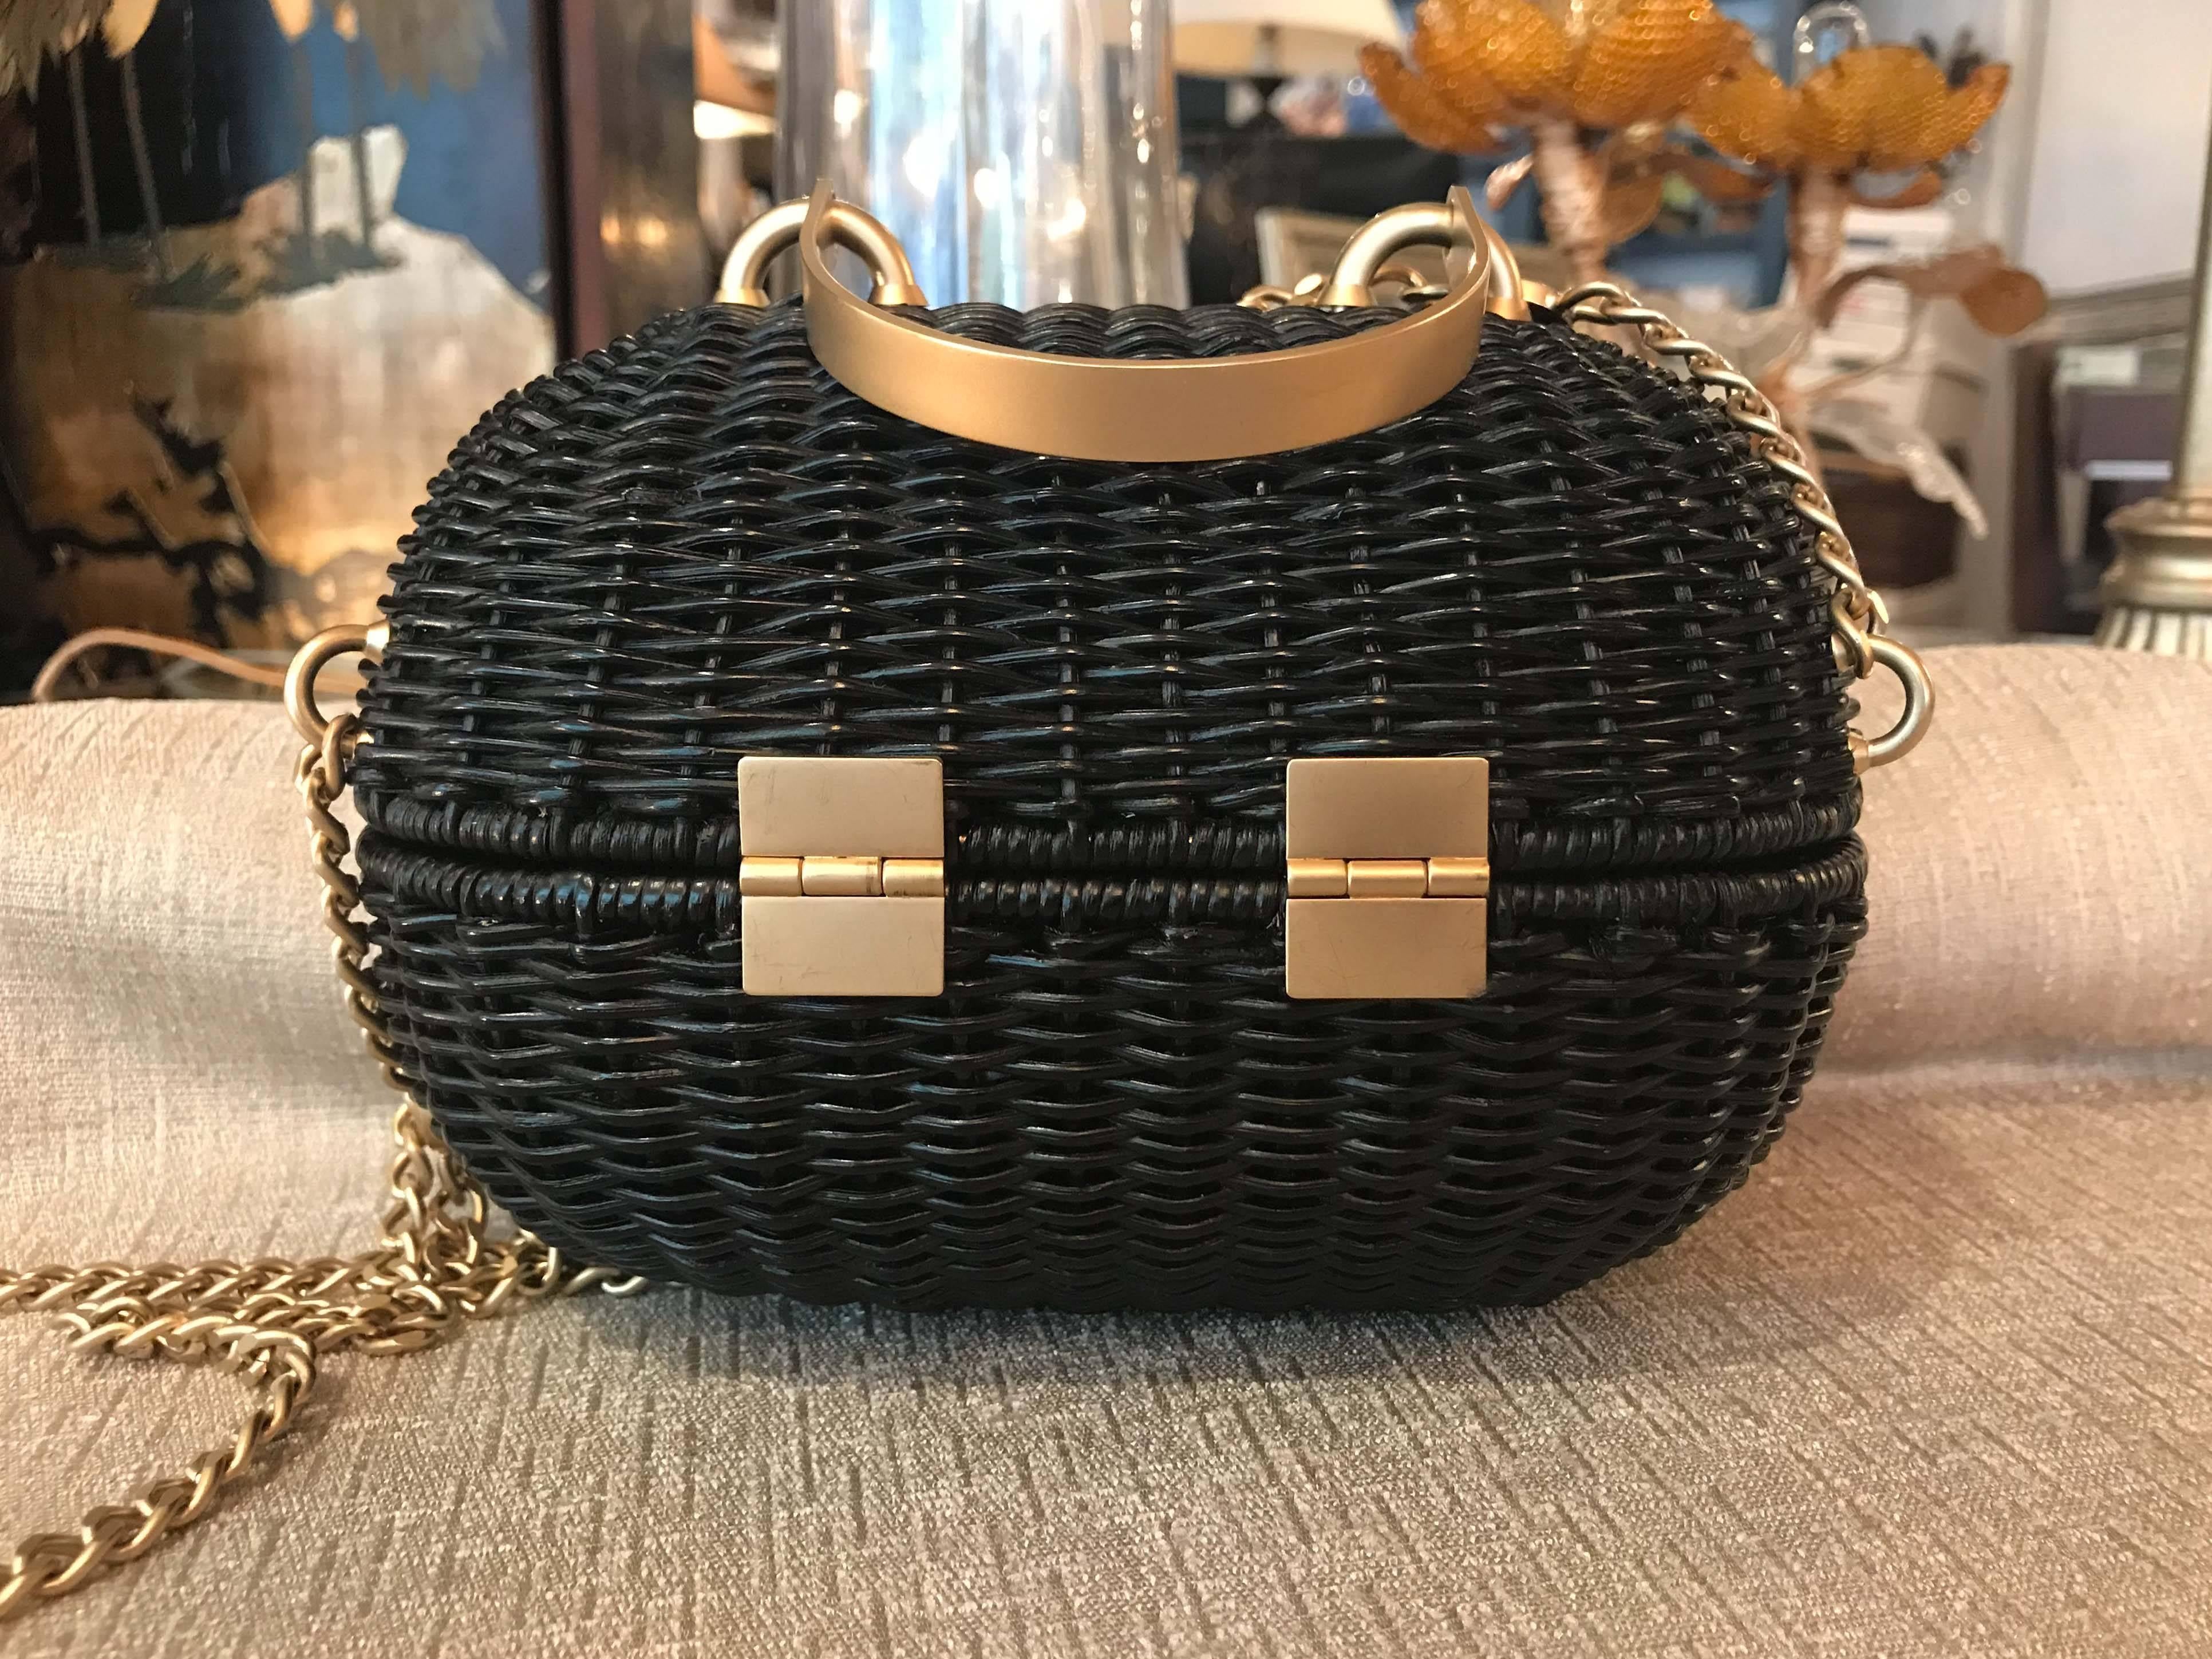 A beautiful and rare Chanel Divers Sac bag, sometimes referred to as the "Sweetheart" rattan bag. Black with matte gold hardware, in very good condition with light wear consistent with occasional use.